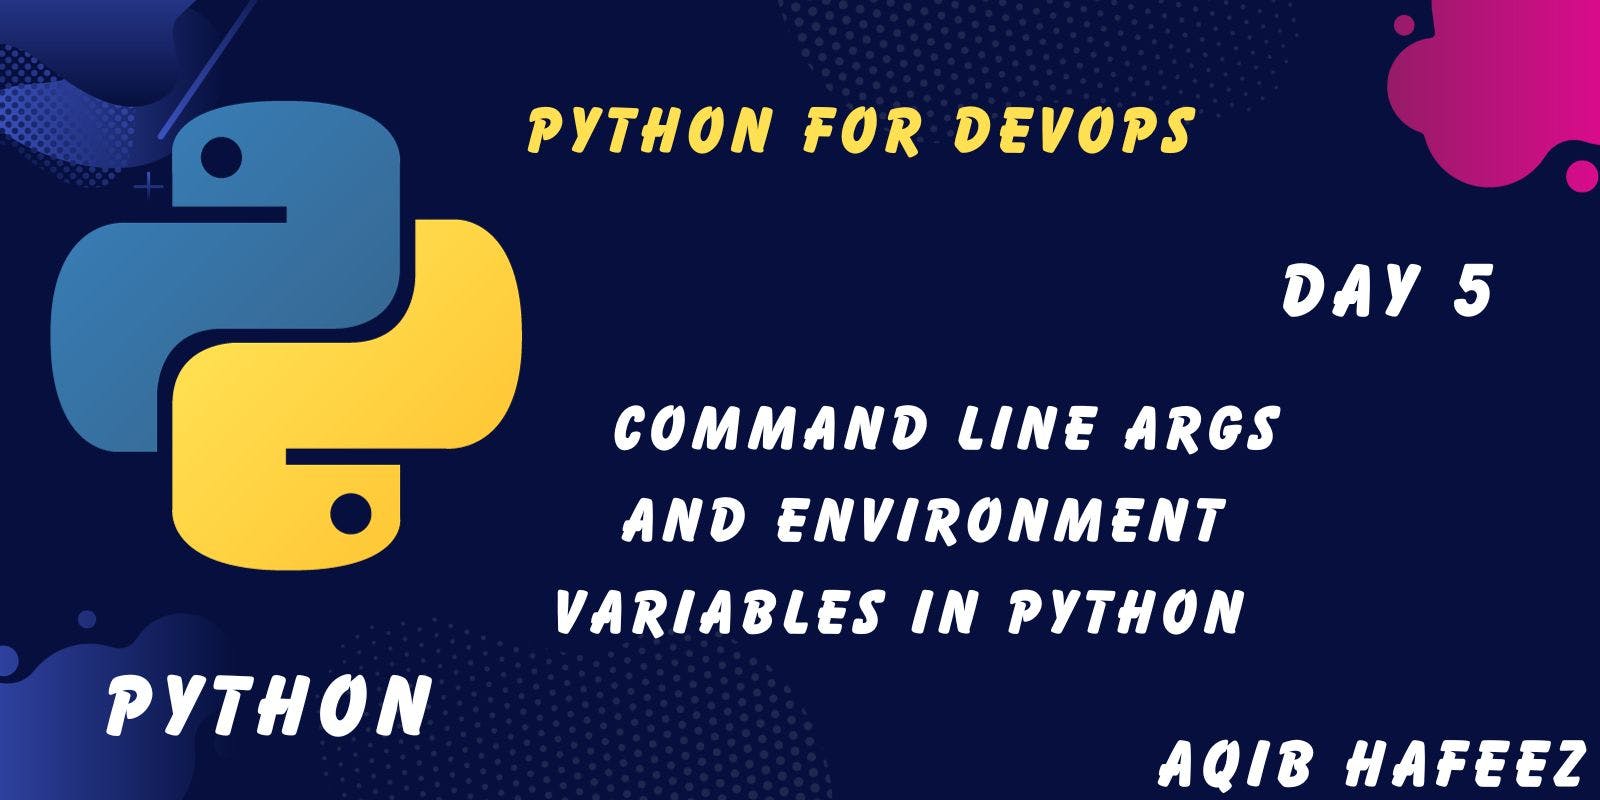 Day 5 - Command Line Args and Environment Variables in Python